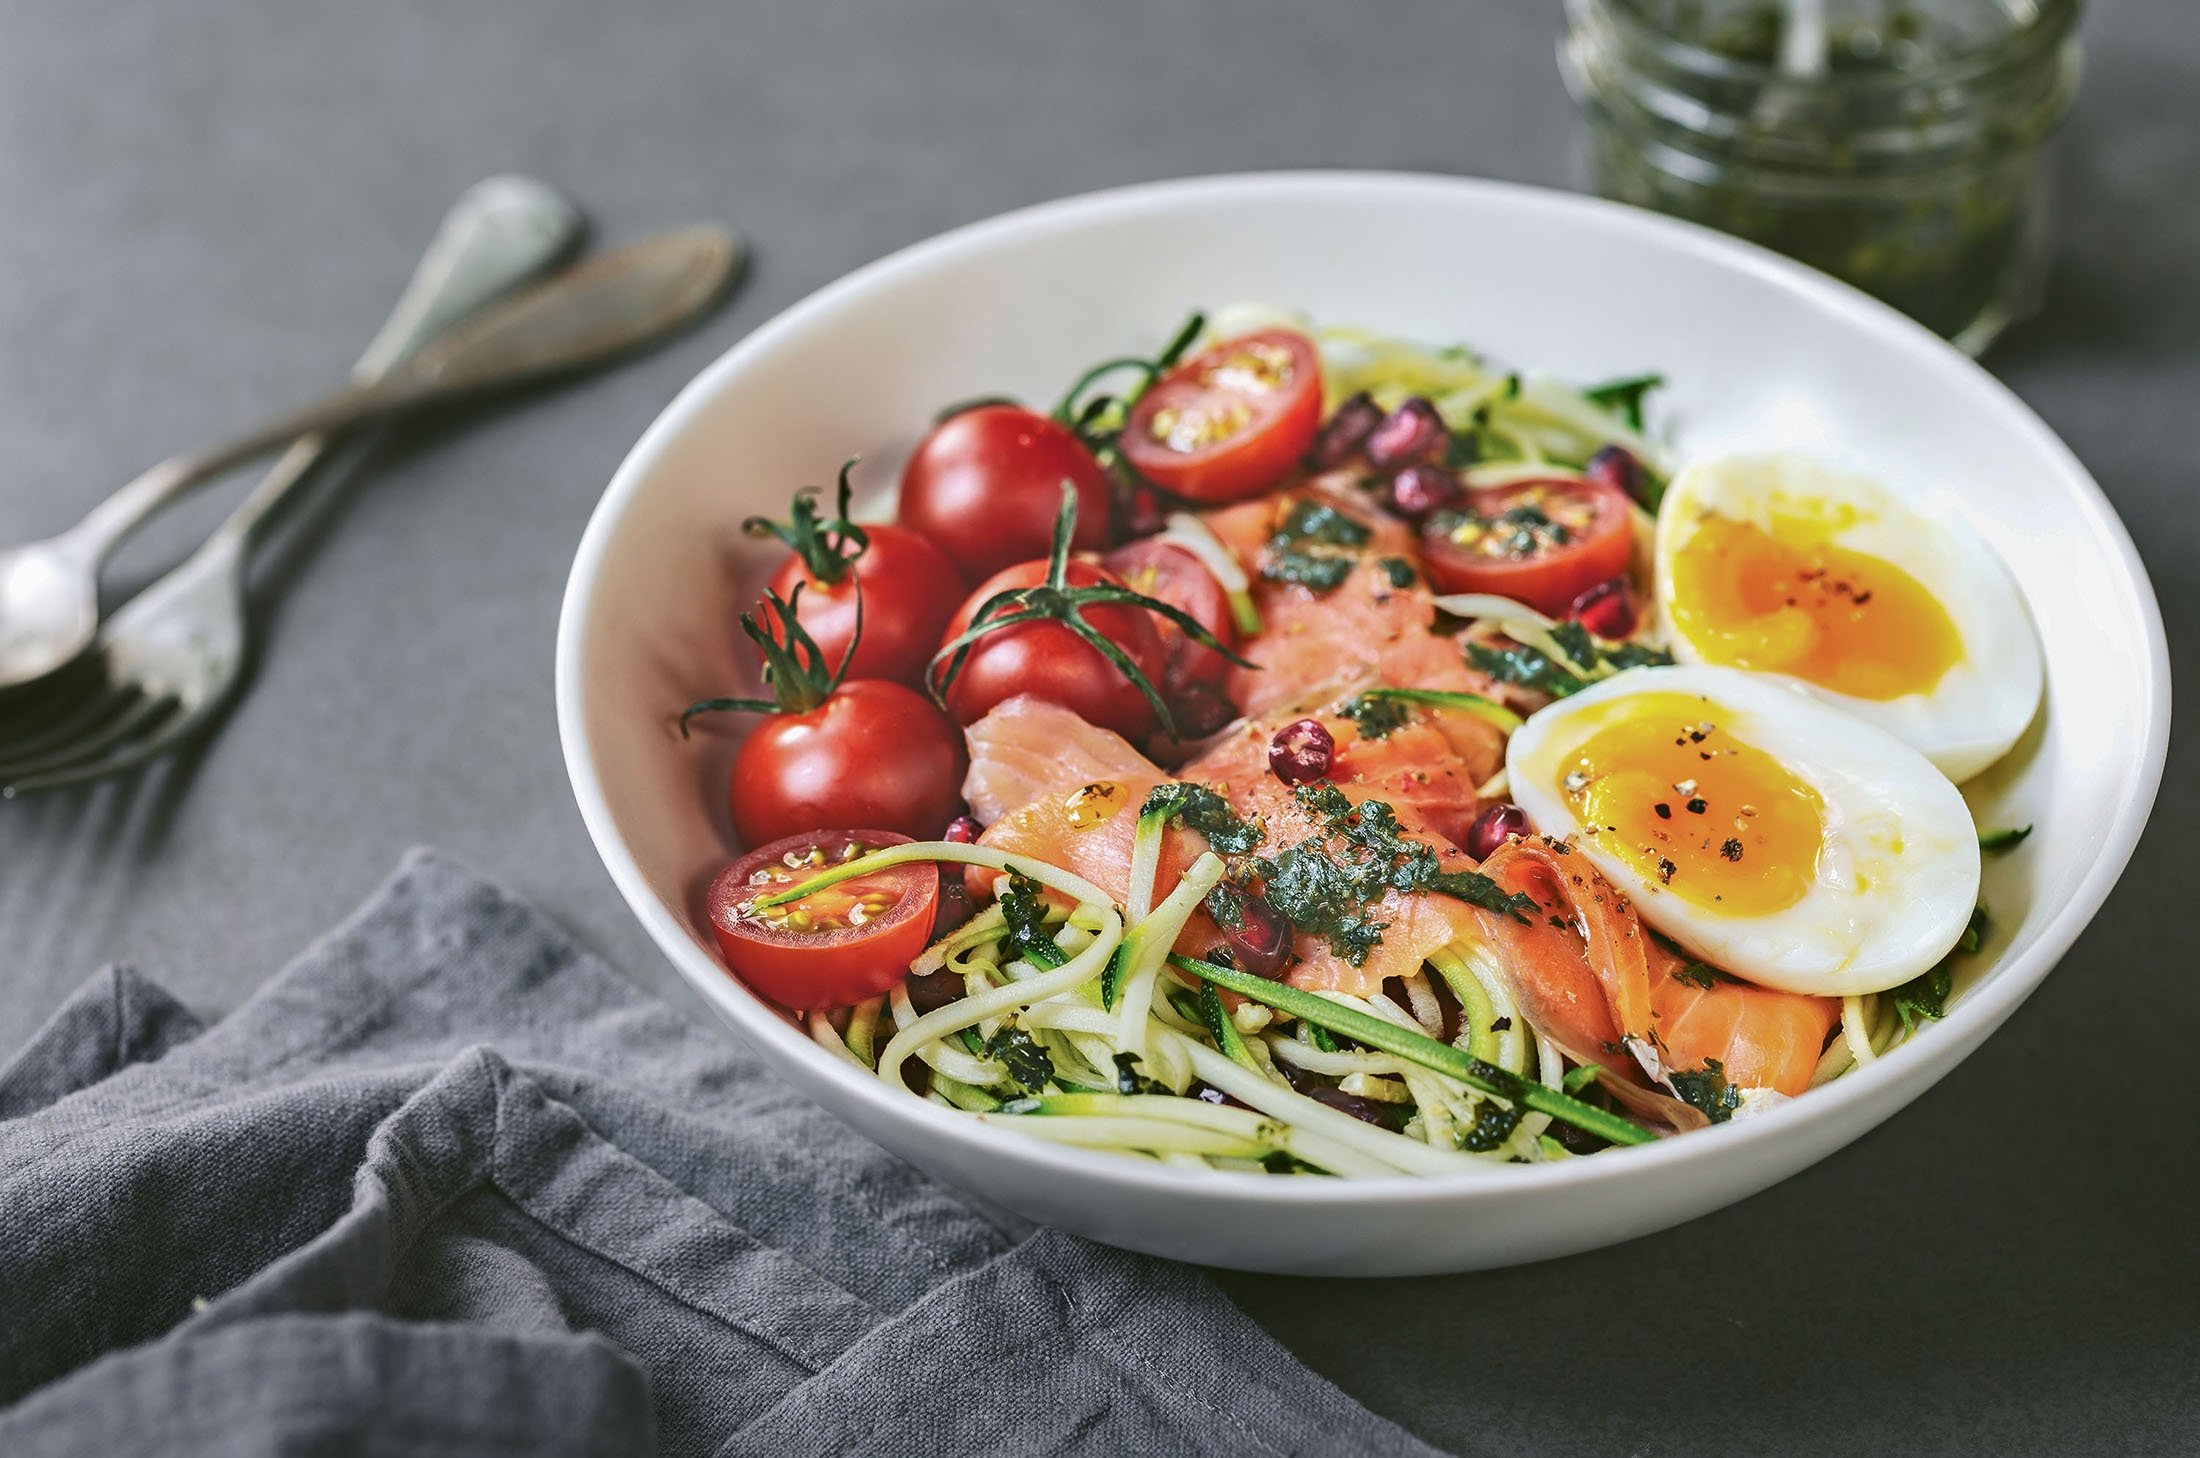 Zucchini zoodles with salmon may seem more elaborate than plain spaghetti, but they are just as quick to prepare.  (Photo from Shutterstock)